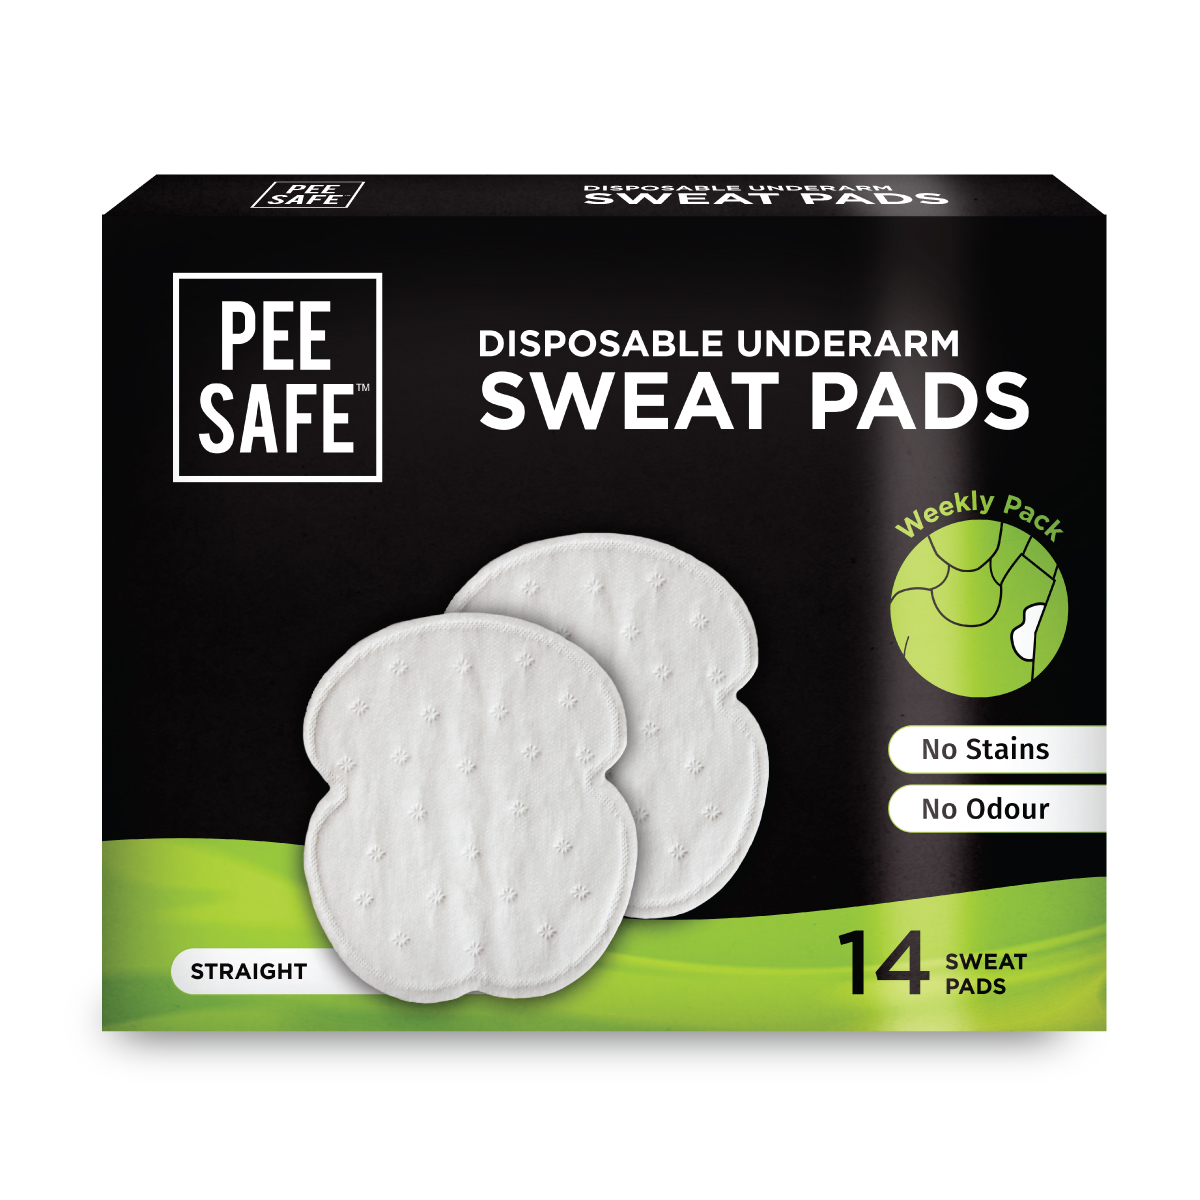 Pee Safe Disposable Underarm Sweat Pads (straight) - Pack Of 14 